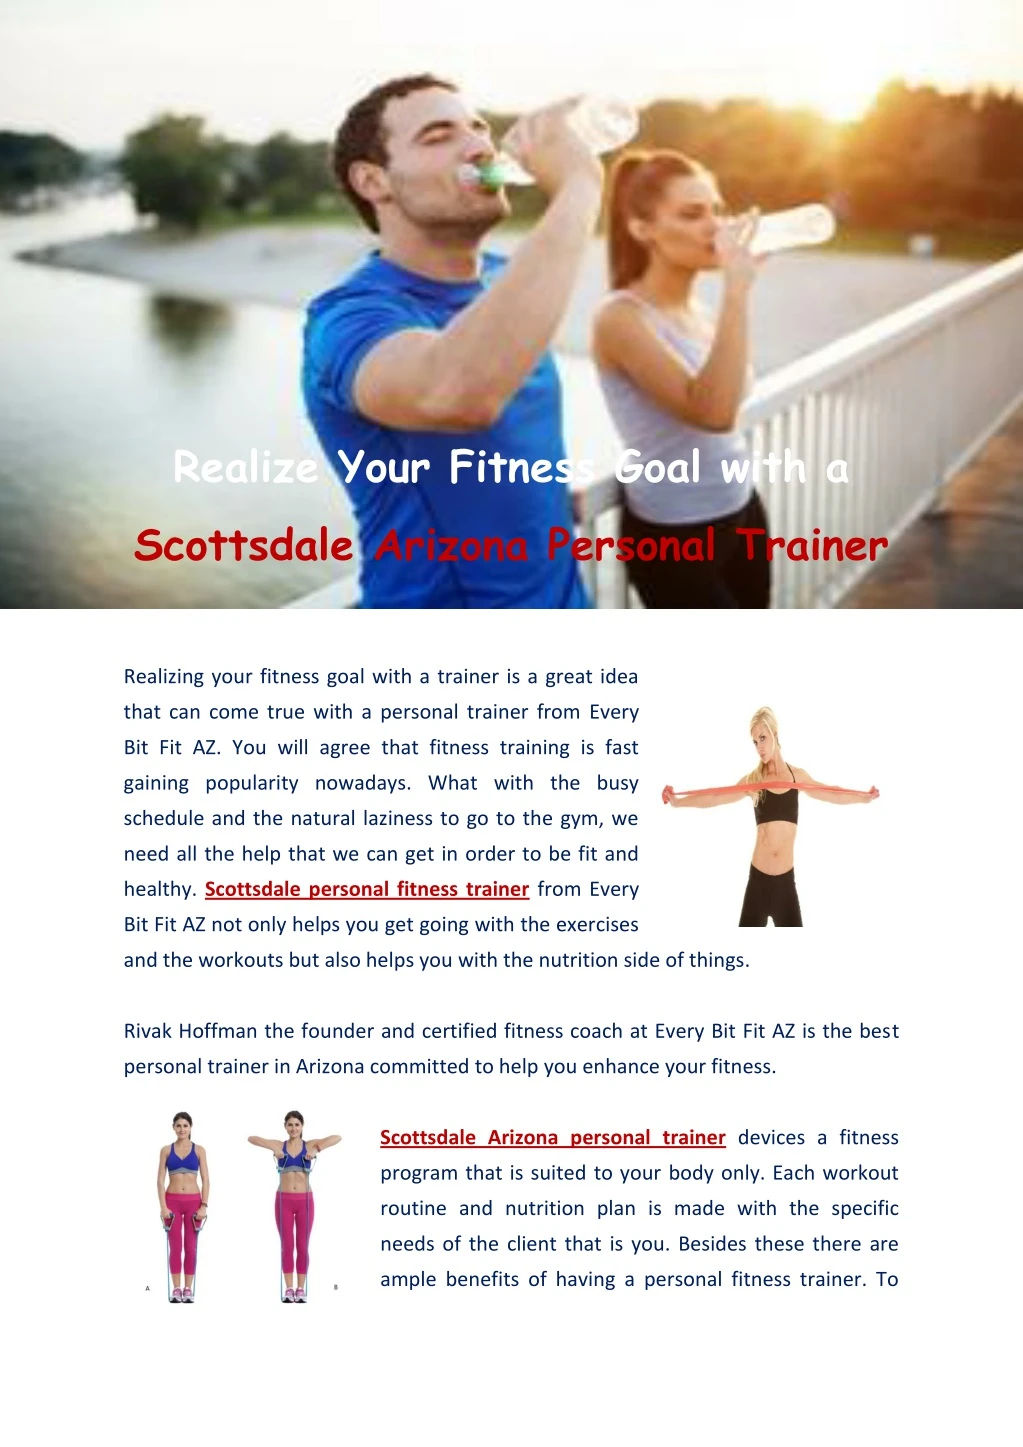 realize your fitness goal with a scottsdale